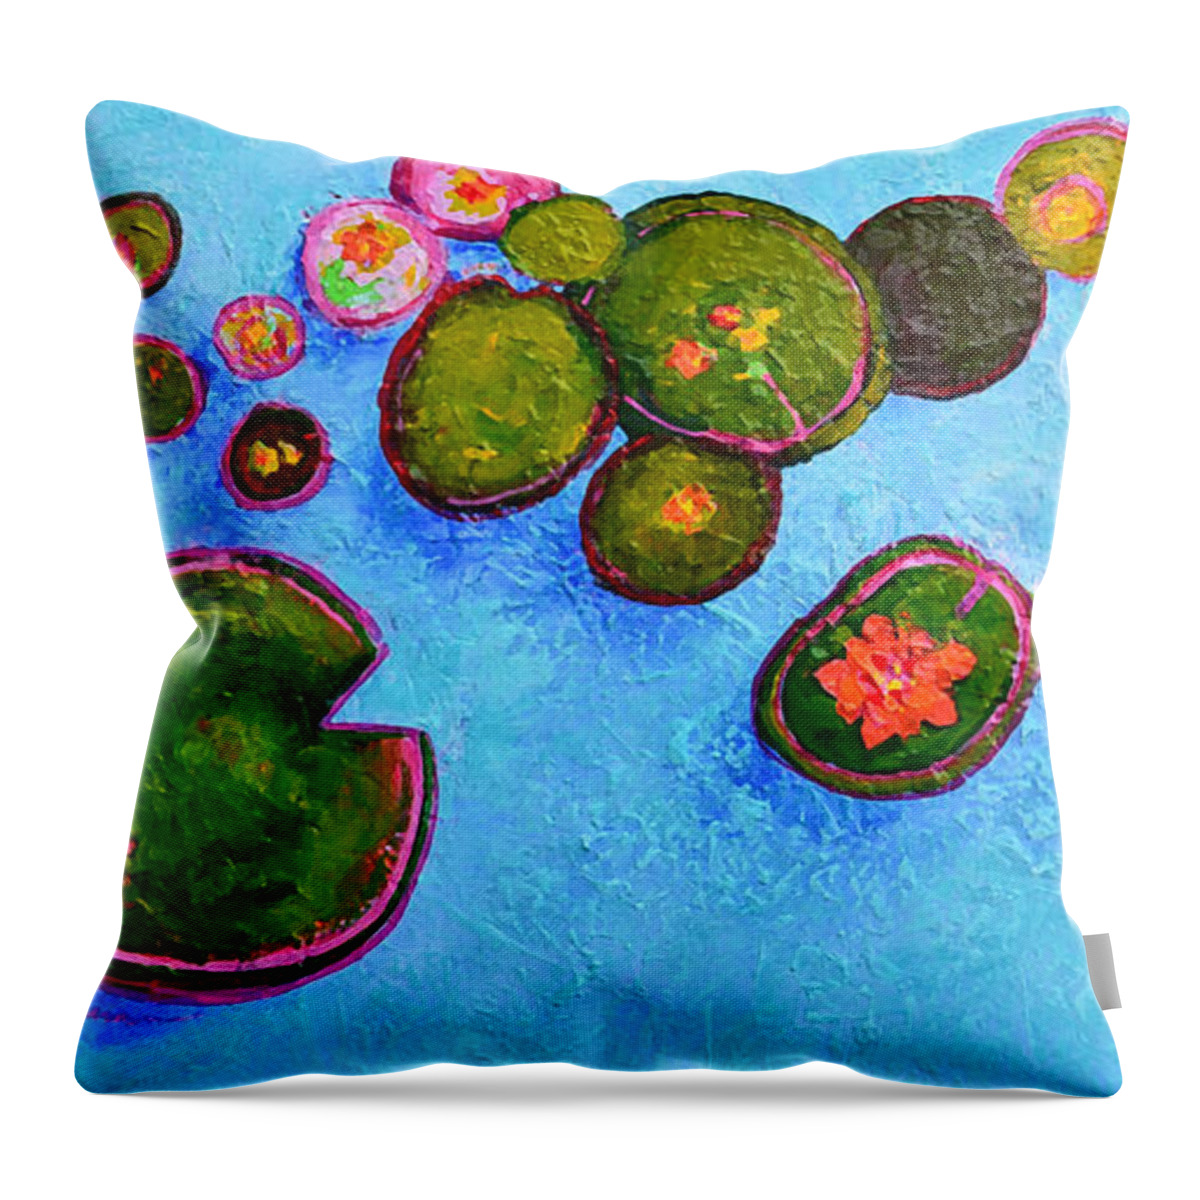 Lily Pads Waterlilies Modern Impressionist Landscape Palette Knife Artwork Unique Art Throw Pillow featuring the painting Lily Pads Waterlilies Pond Modern Impressionist Landscape palette knife Artwork by Patricia Awapara